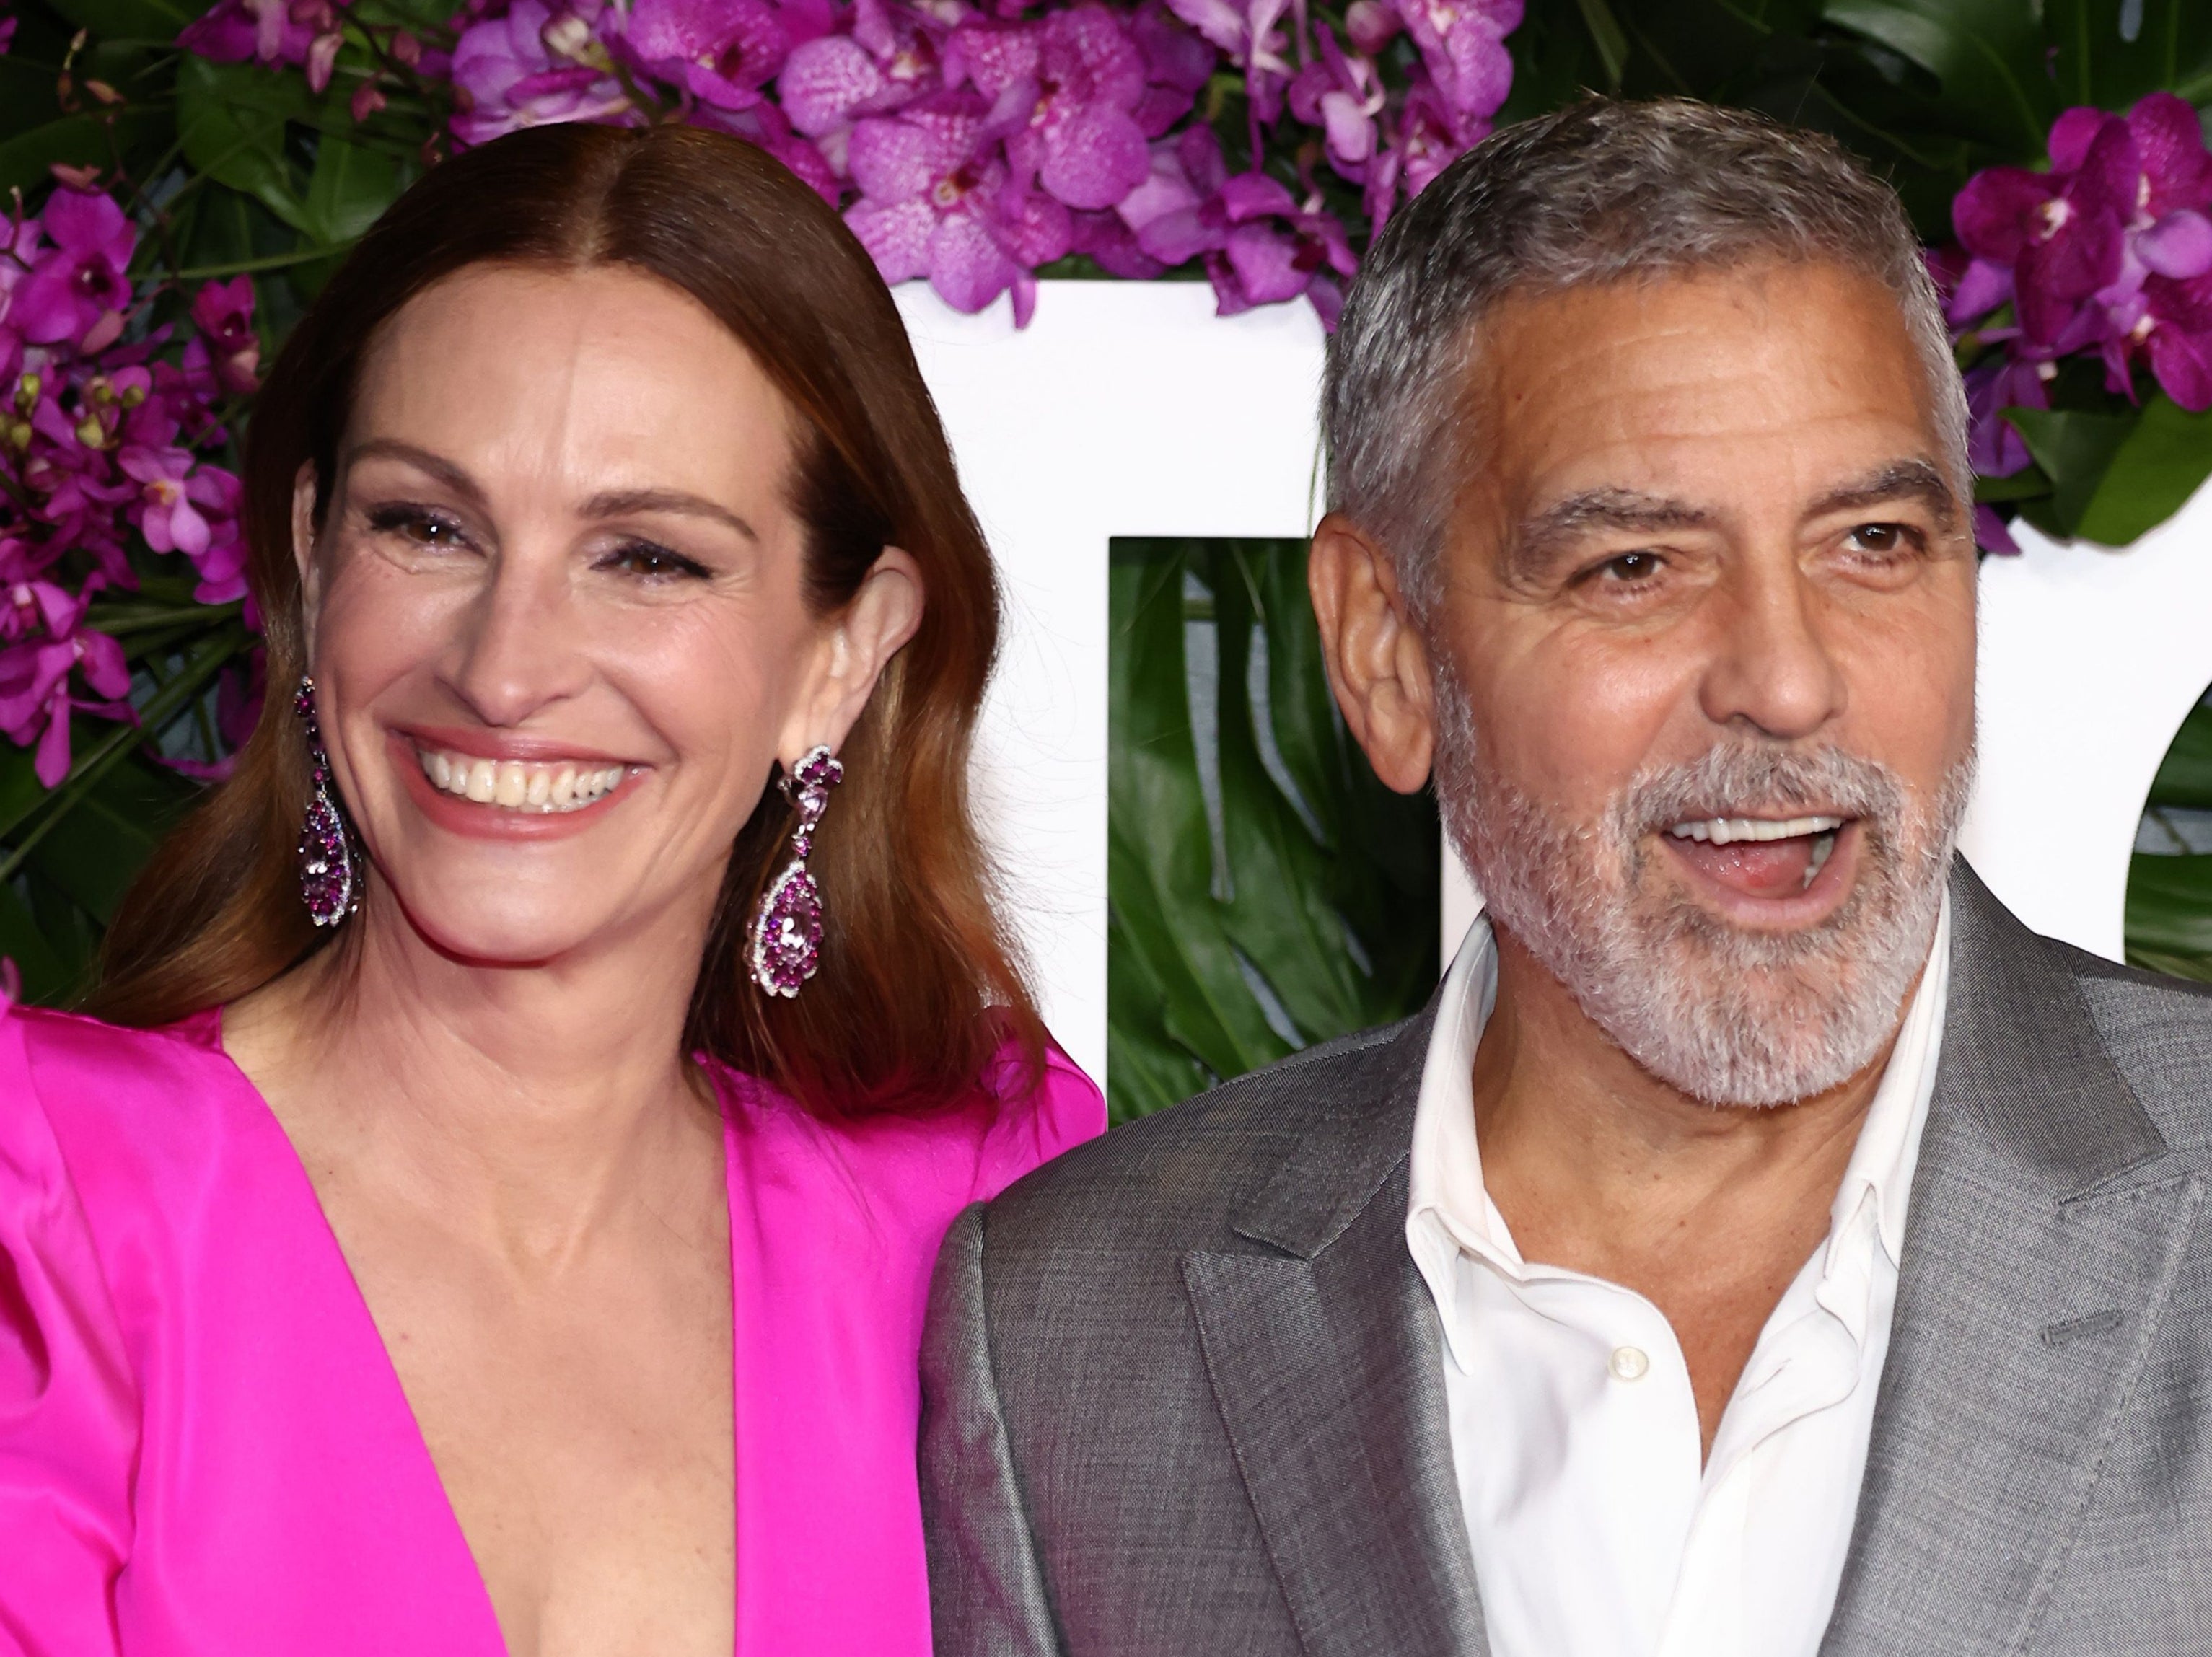 Julia Roberts and George Clooney at the premiere of Ticket To Paradise in October 2022 in Los Angeles